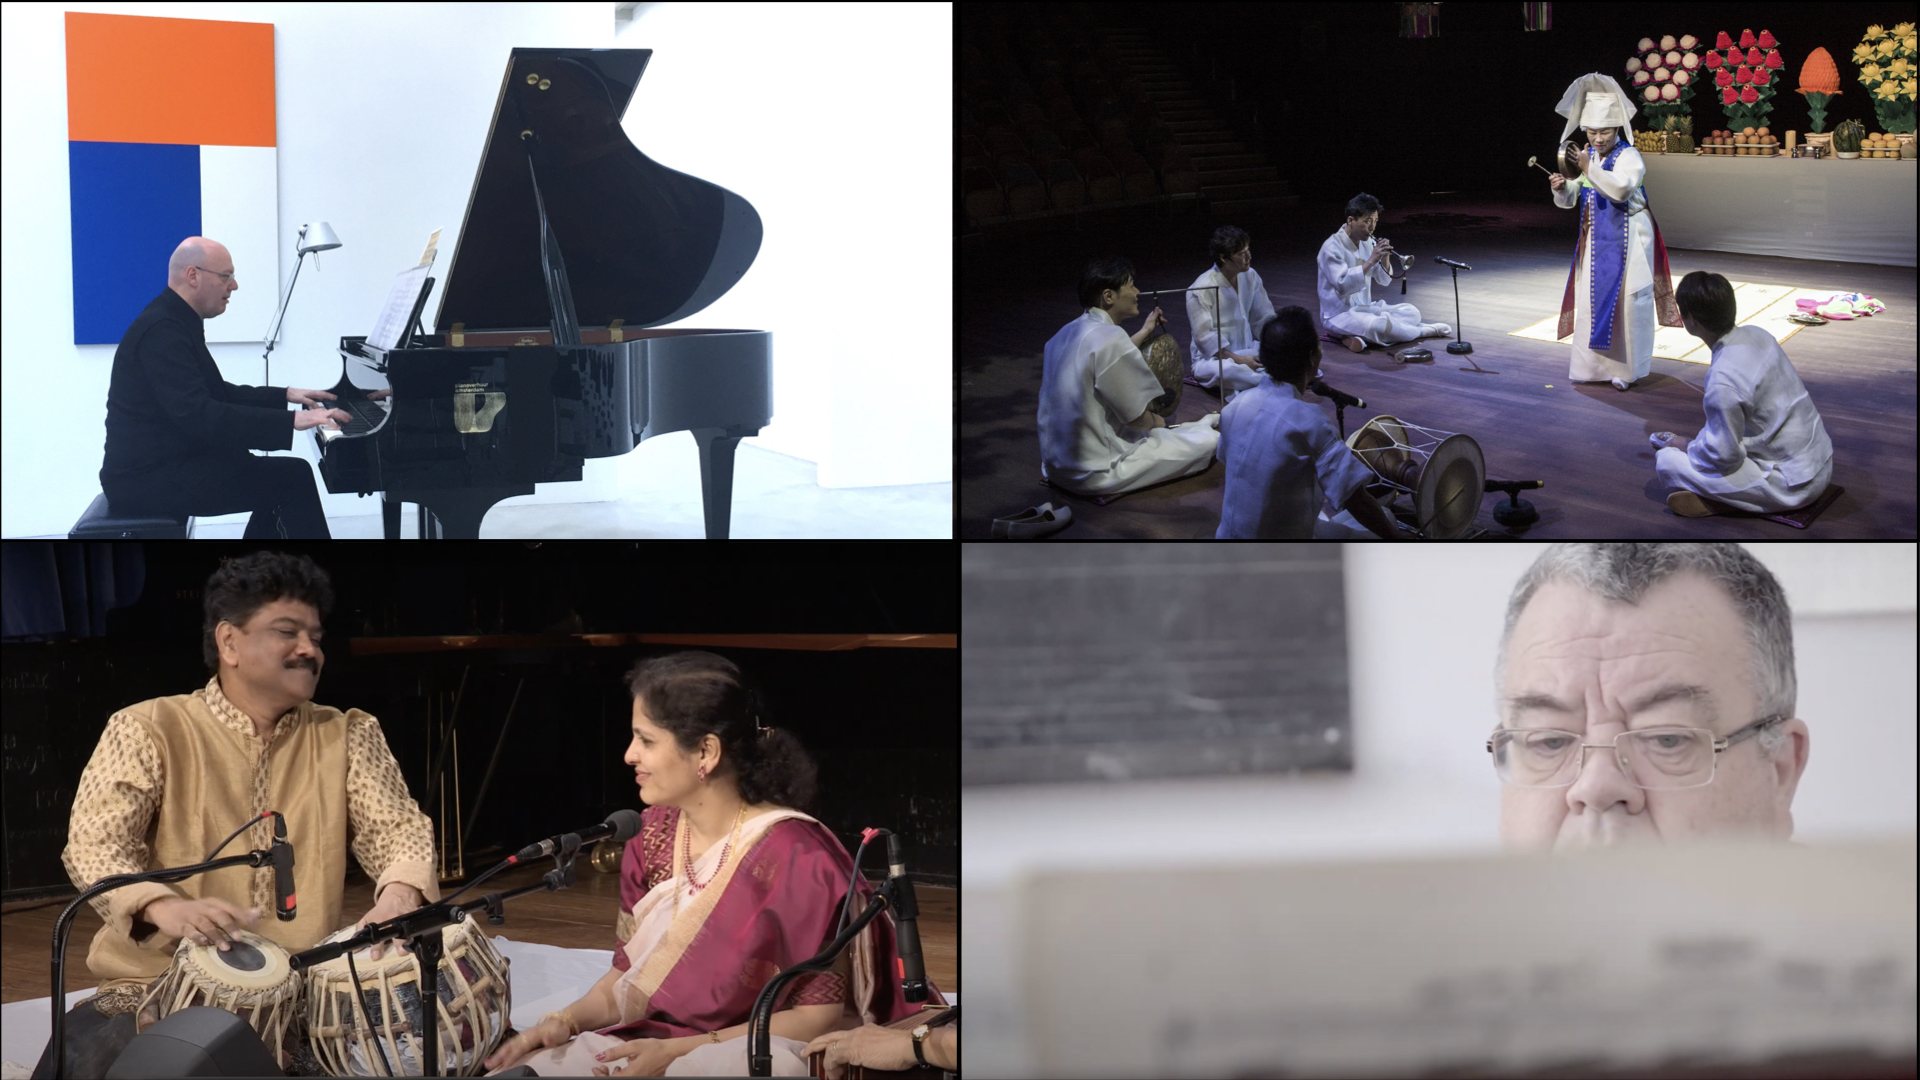 Four images showing musical performances